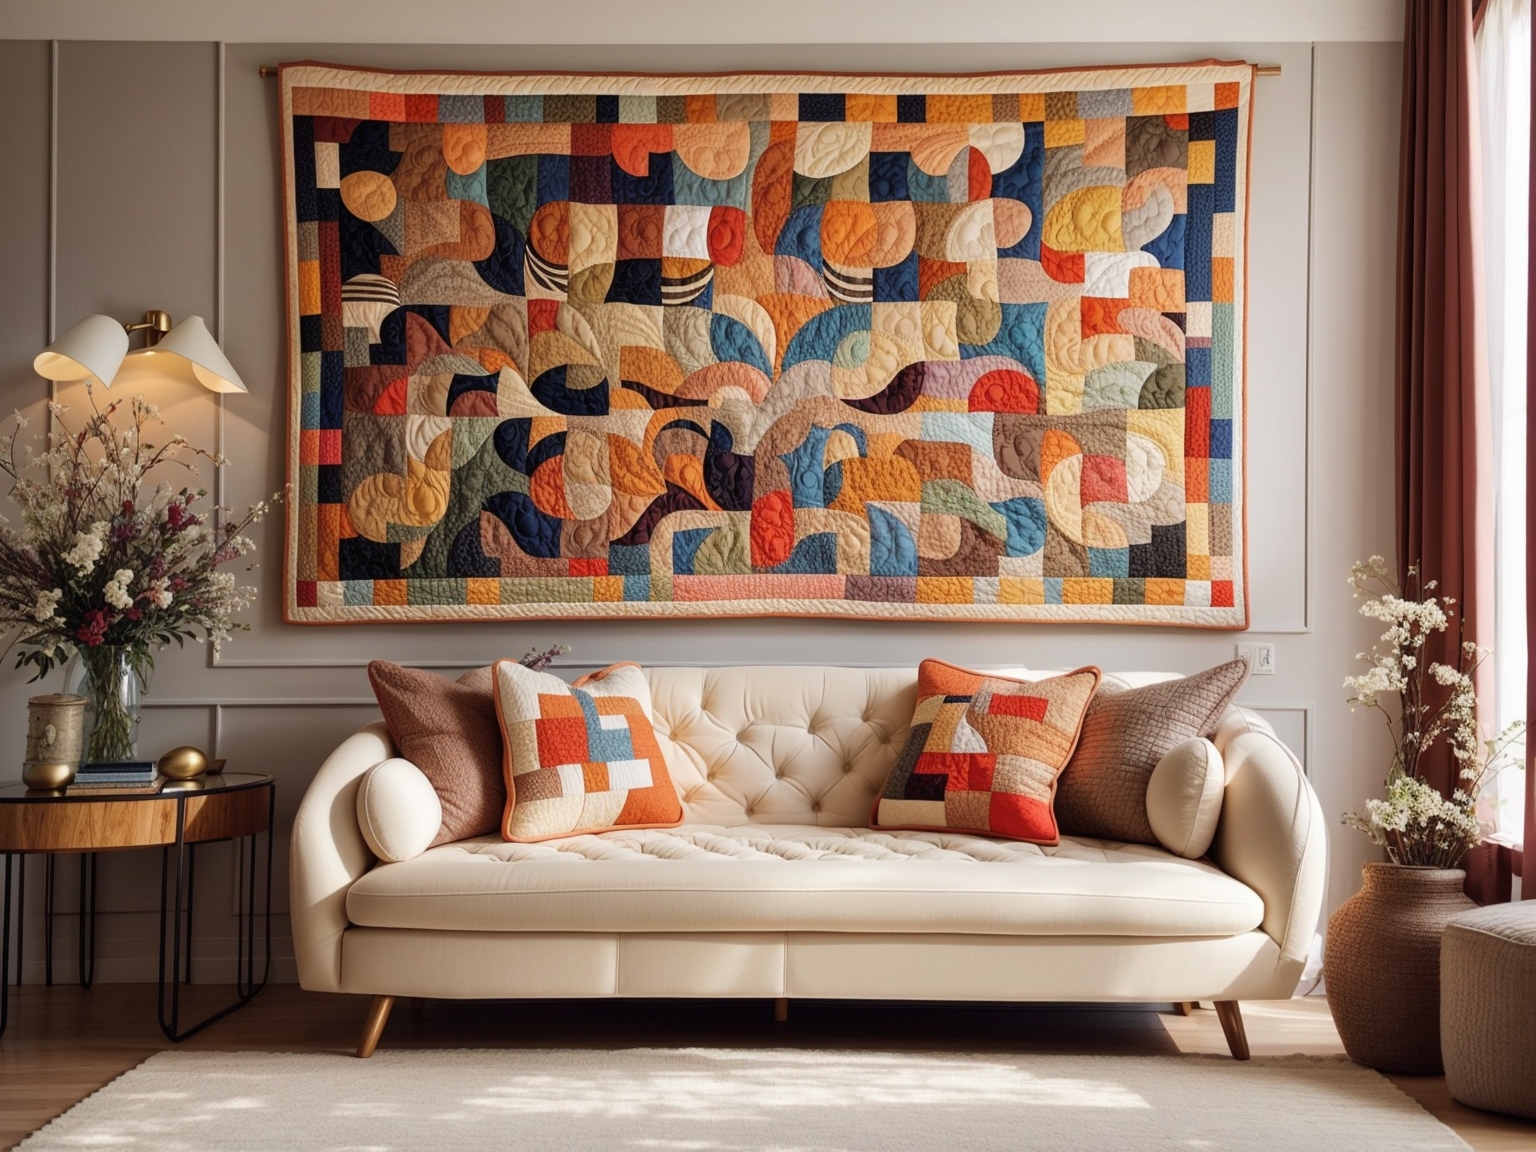 Quilting Creations for Home Decor: Enhancing Spaces with Handcrafted Textiles